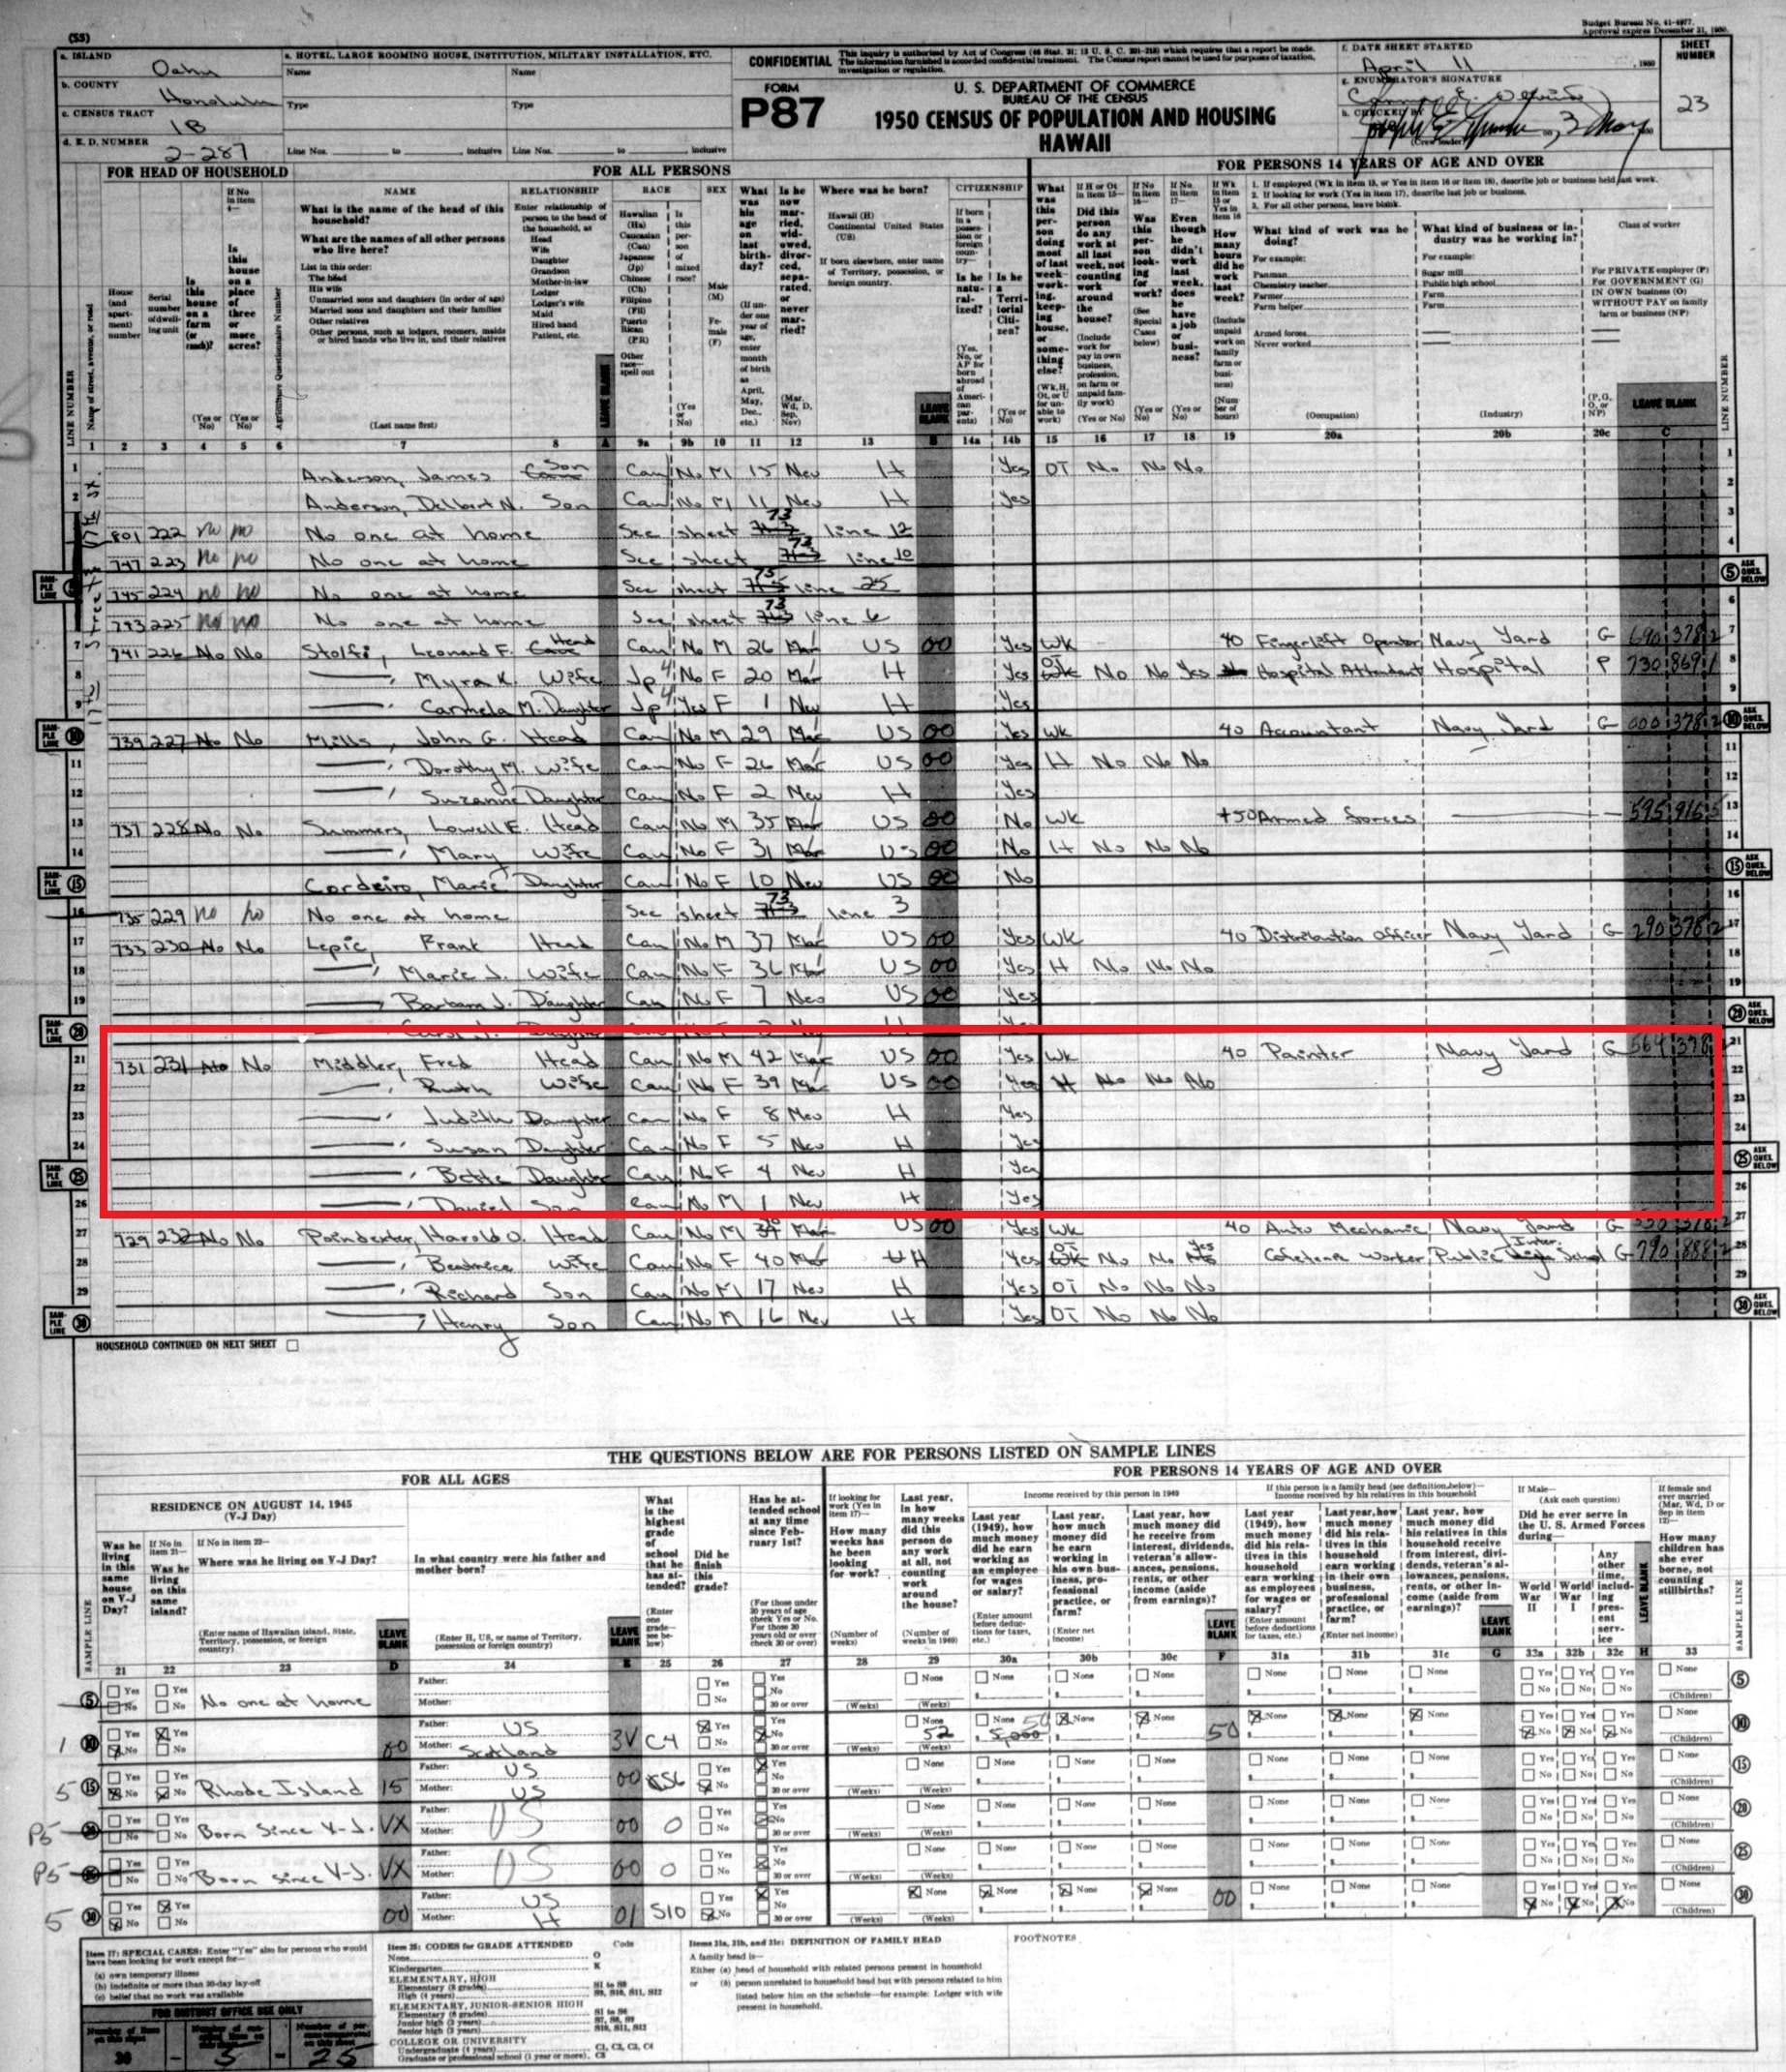 Census record of Bette Midler (Kilde: MyHeritage 1950 United States Federal Census)